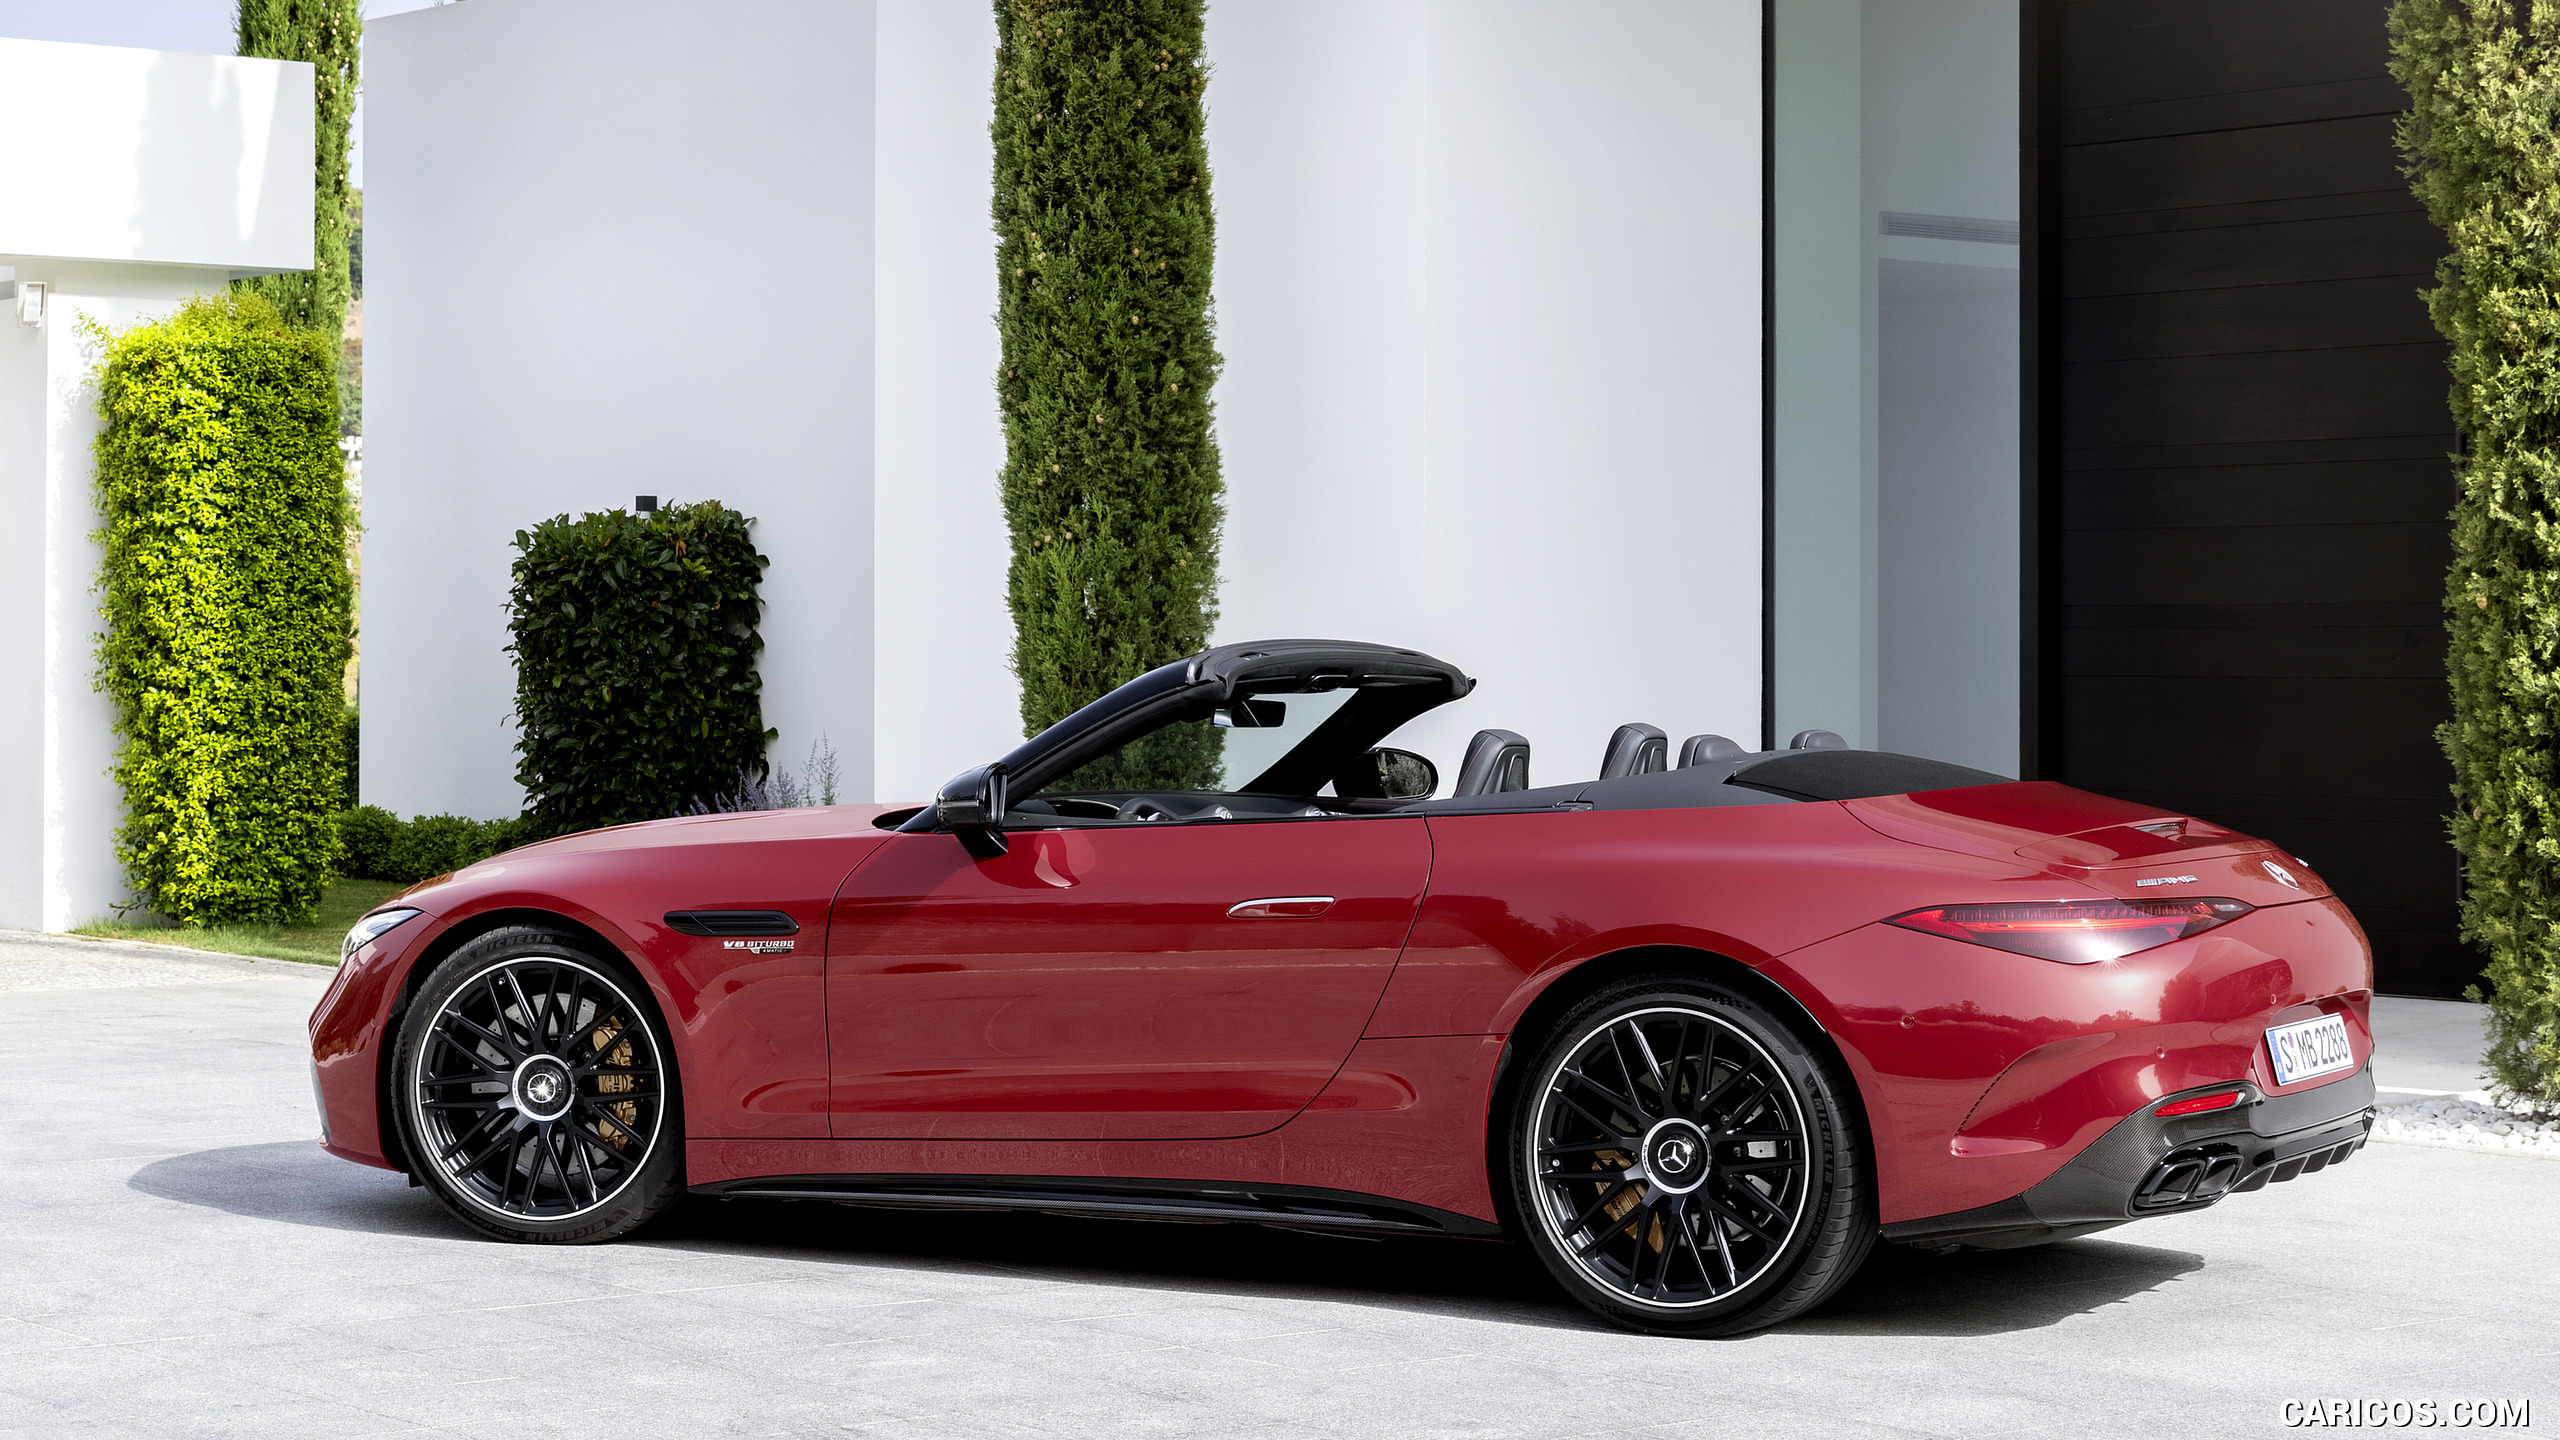 2022 Mercedes-AMG SL 63 4MATIC+ (Color: Patagonia Red Metallic) - Side, #15 of 235